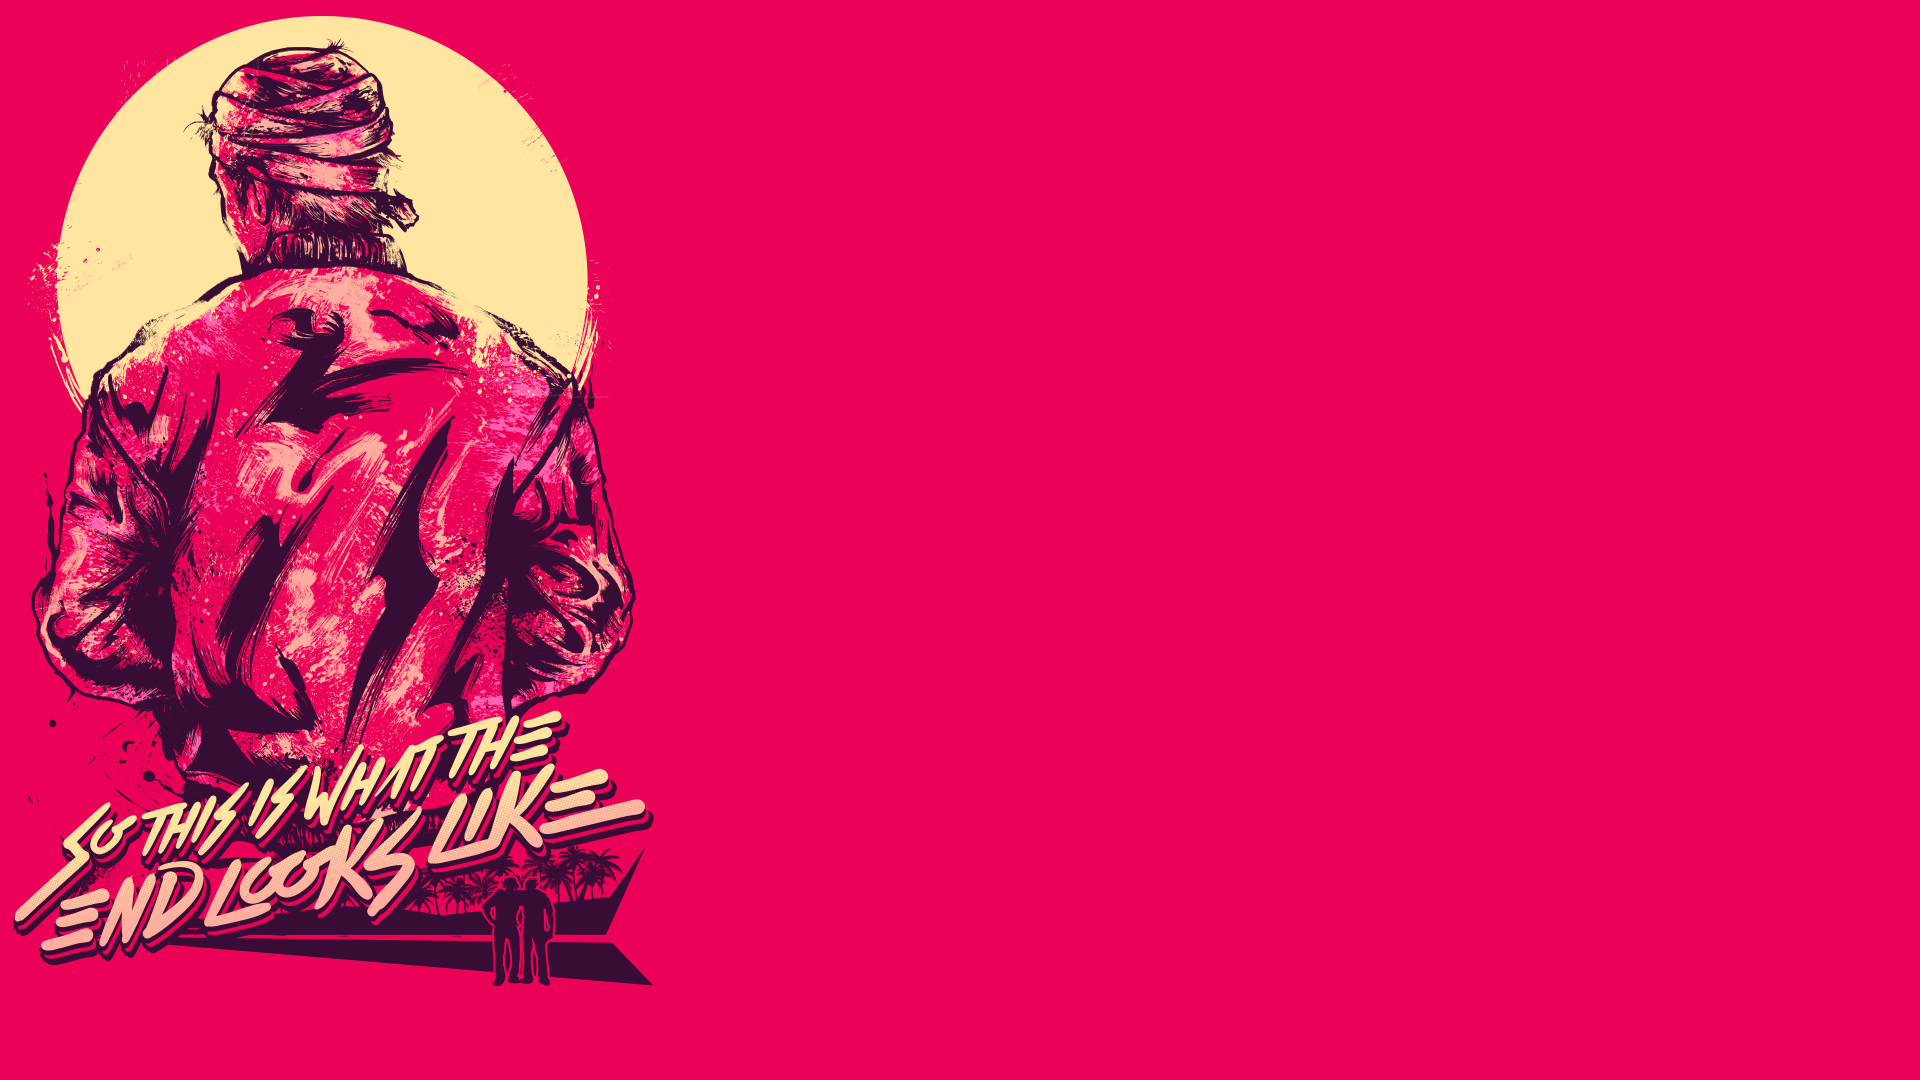 Hotline Miami Wallpapers - Top Free Hotline Miami Backgrounds